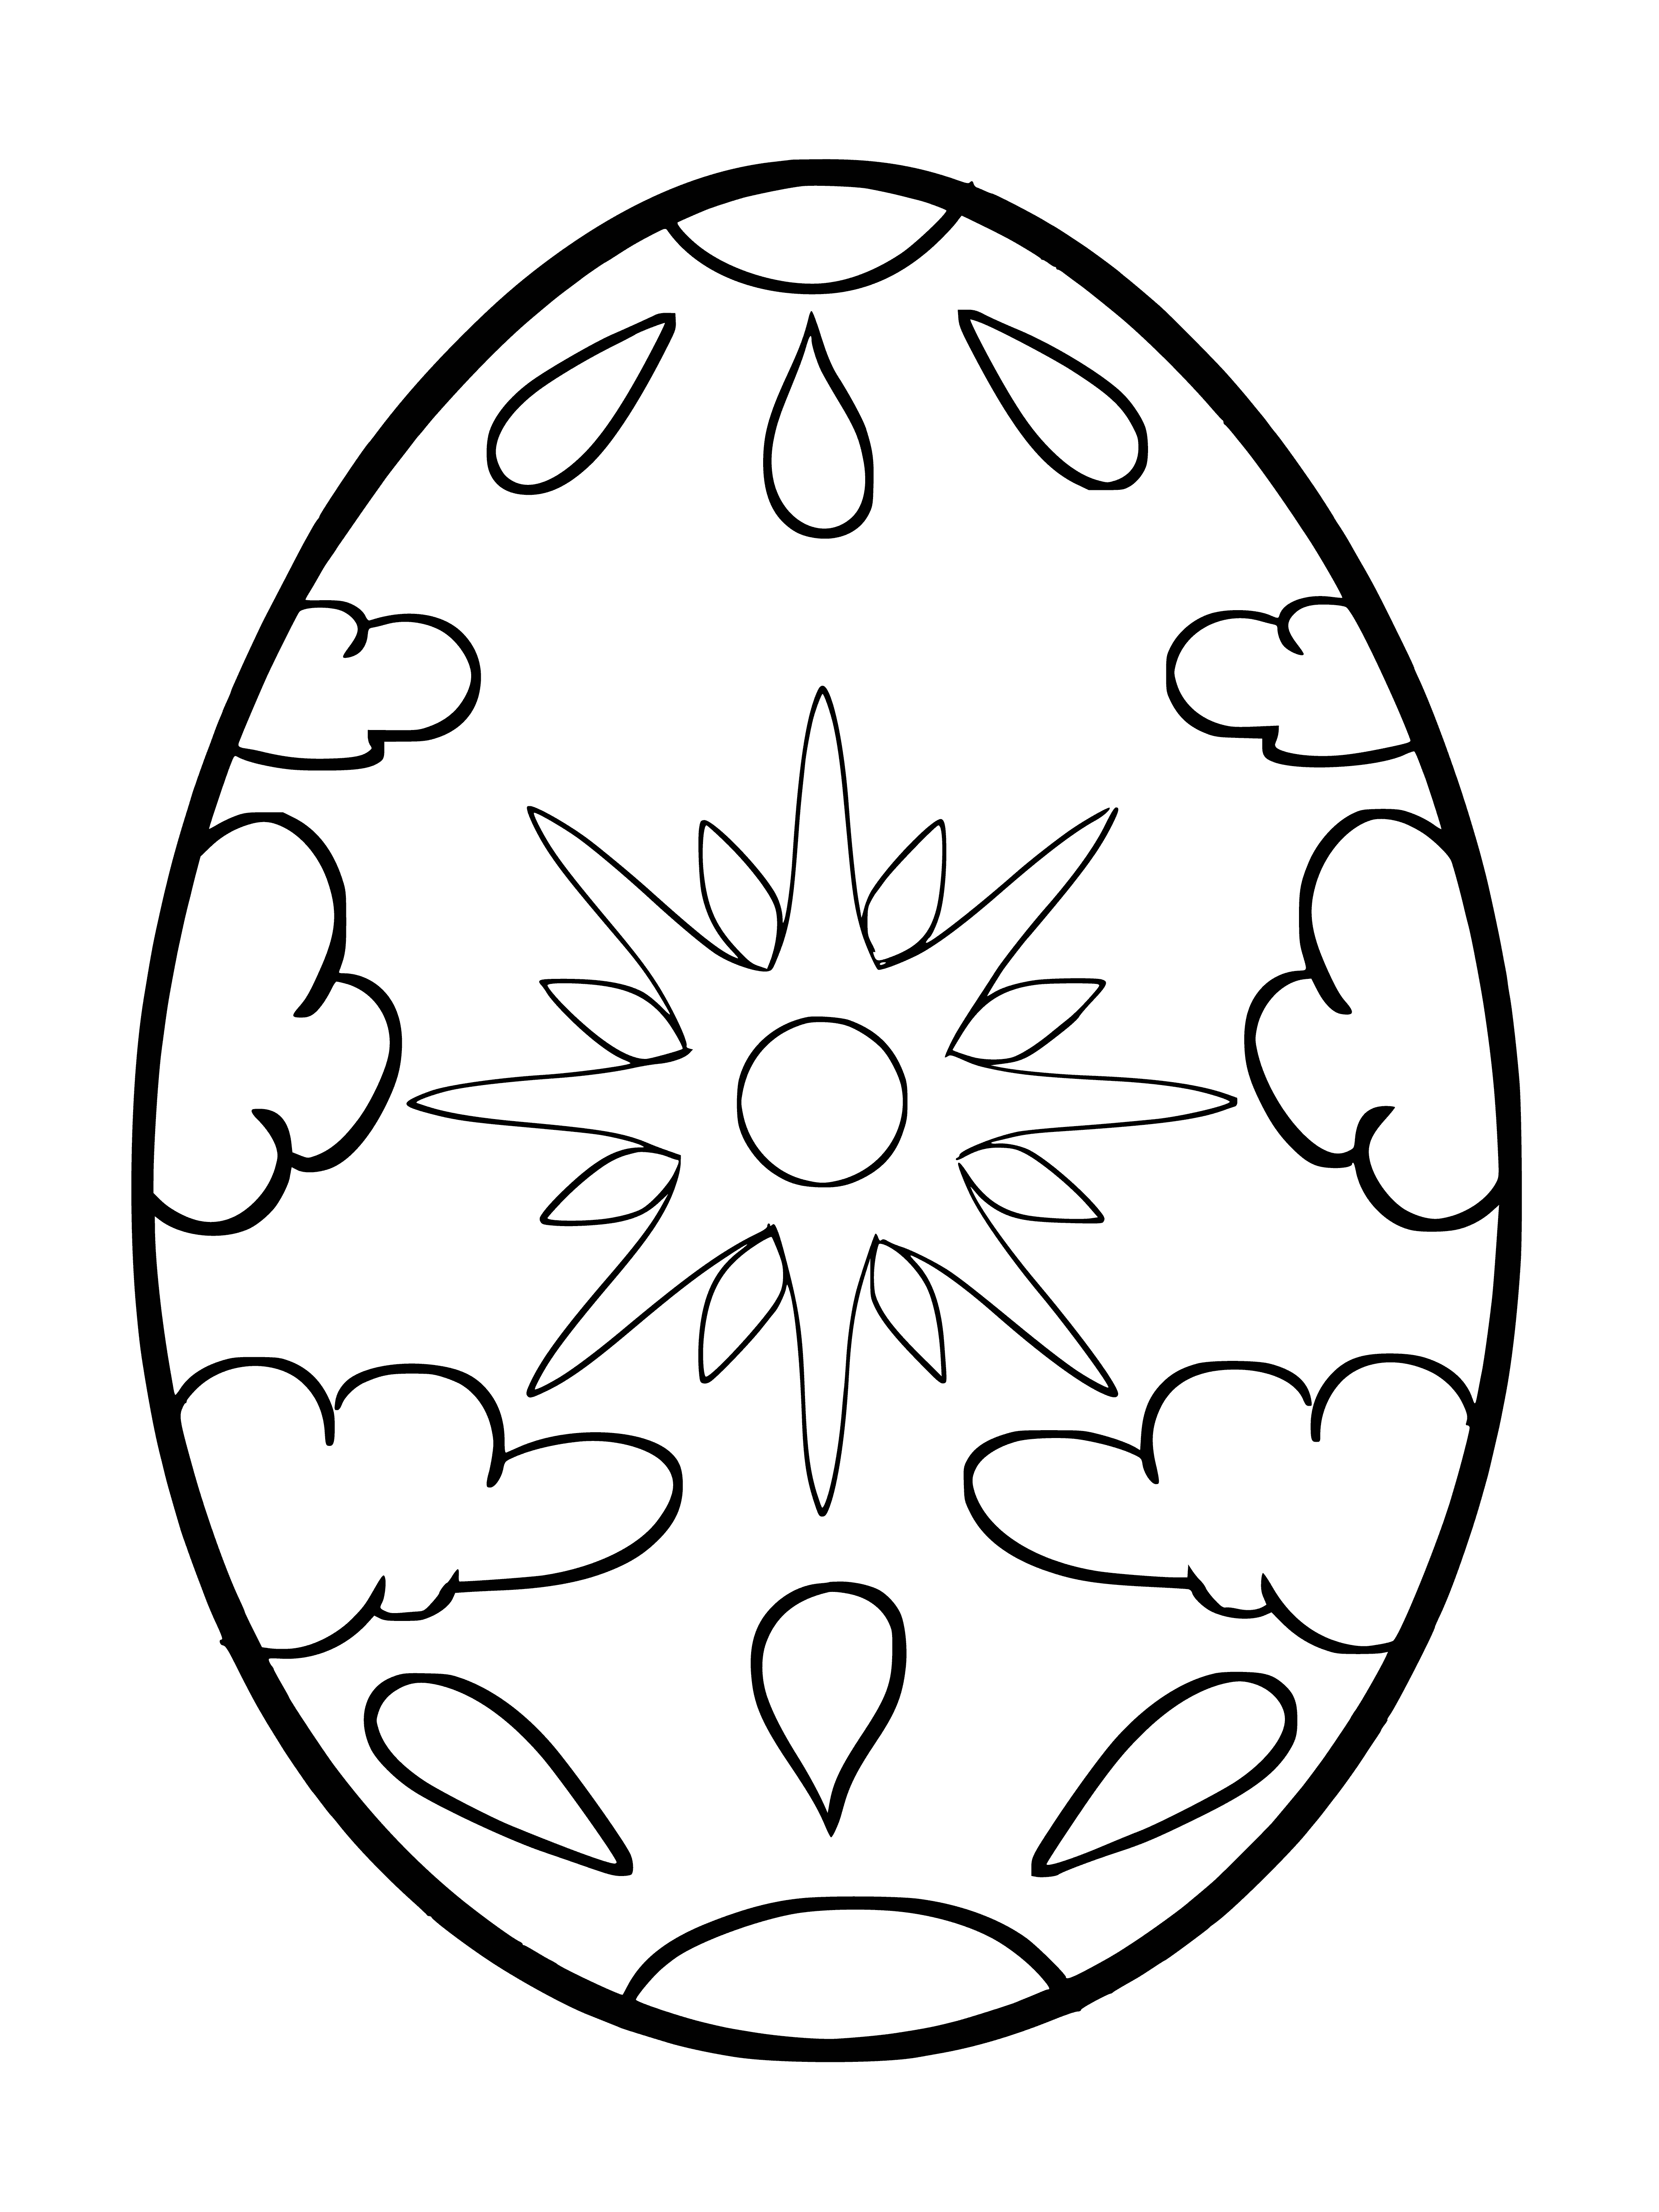 coloring page: Easter eggs of various colors & designs, some plain, are shown in the coloring page.